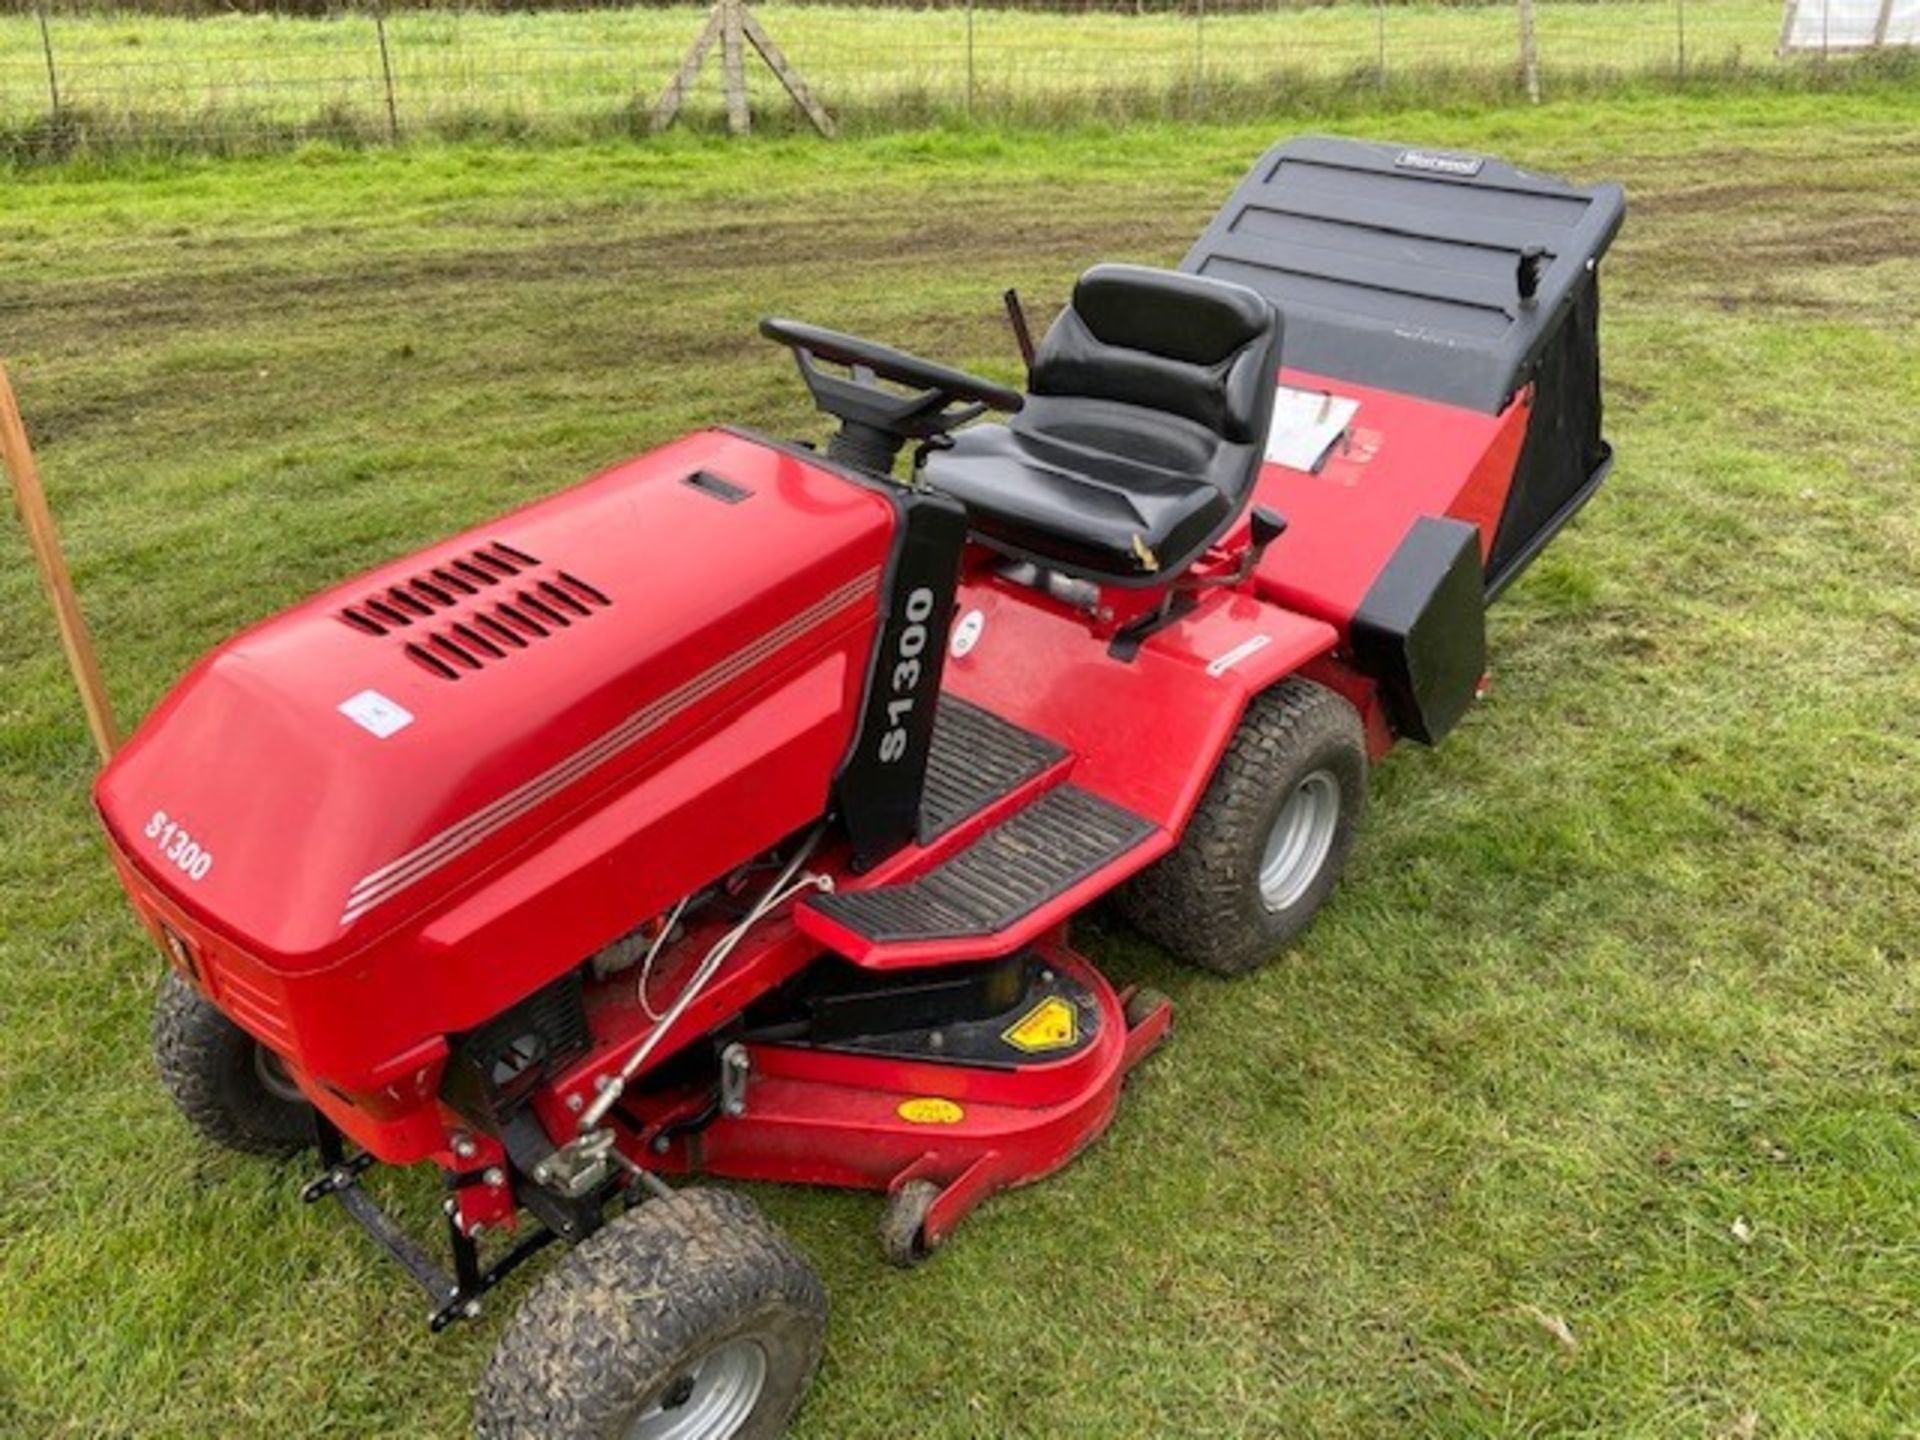 Ransome S1300 ride-on lawn mower, runs and cuts well with grass collector box - Image 2 of 2